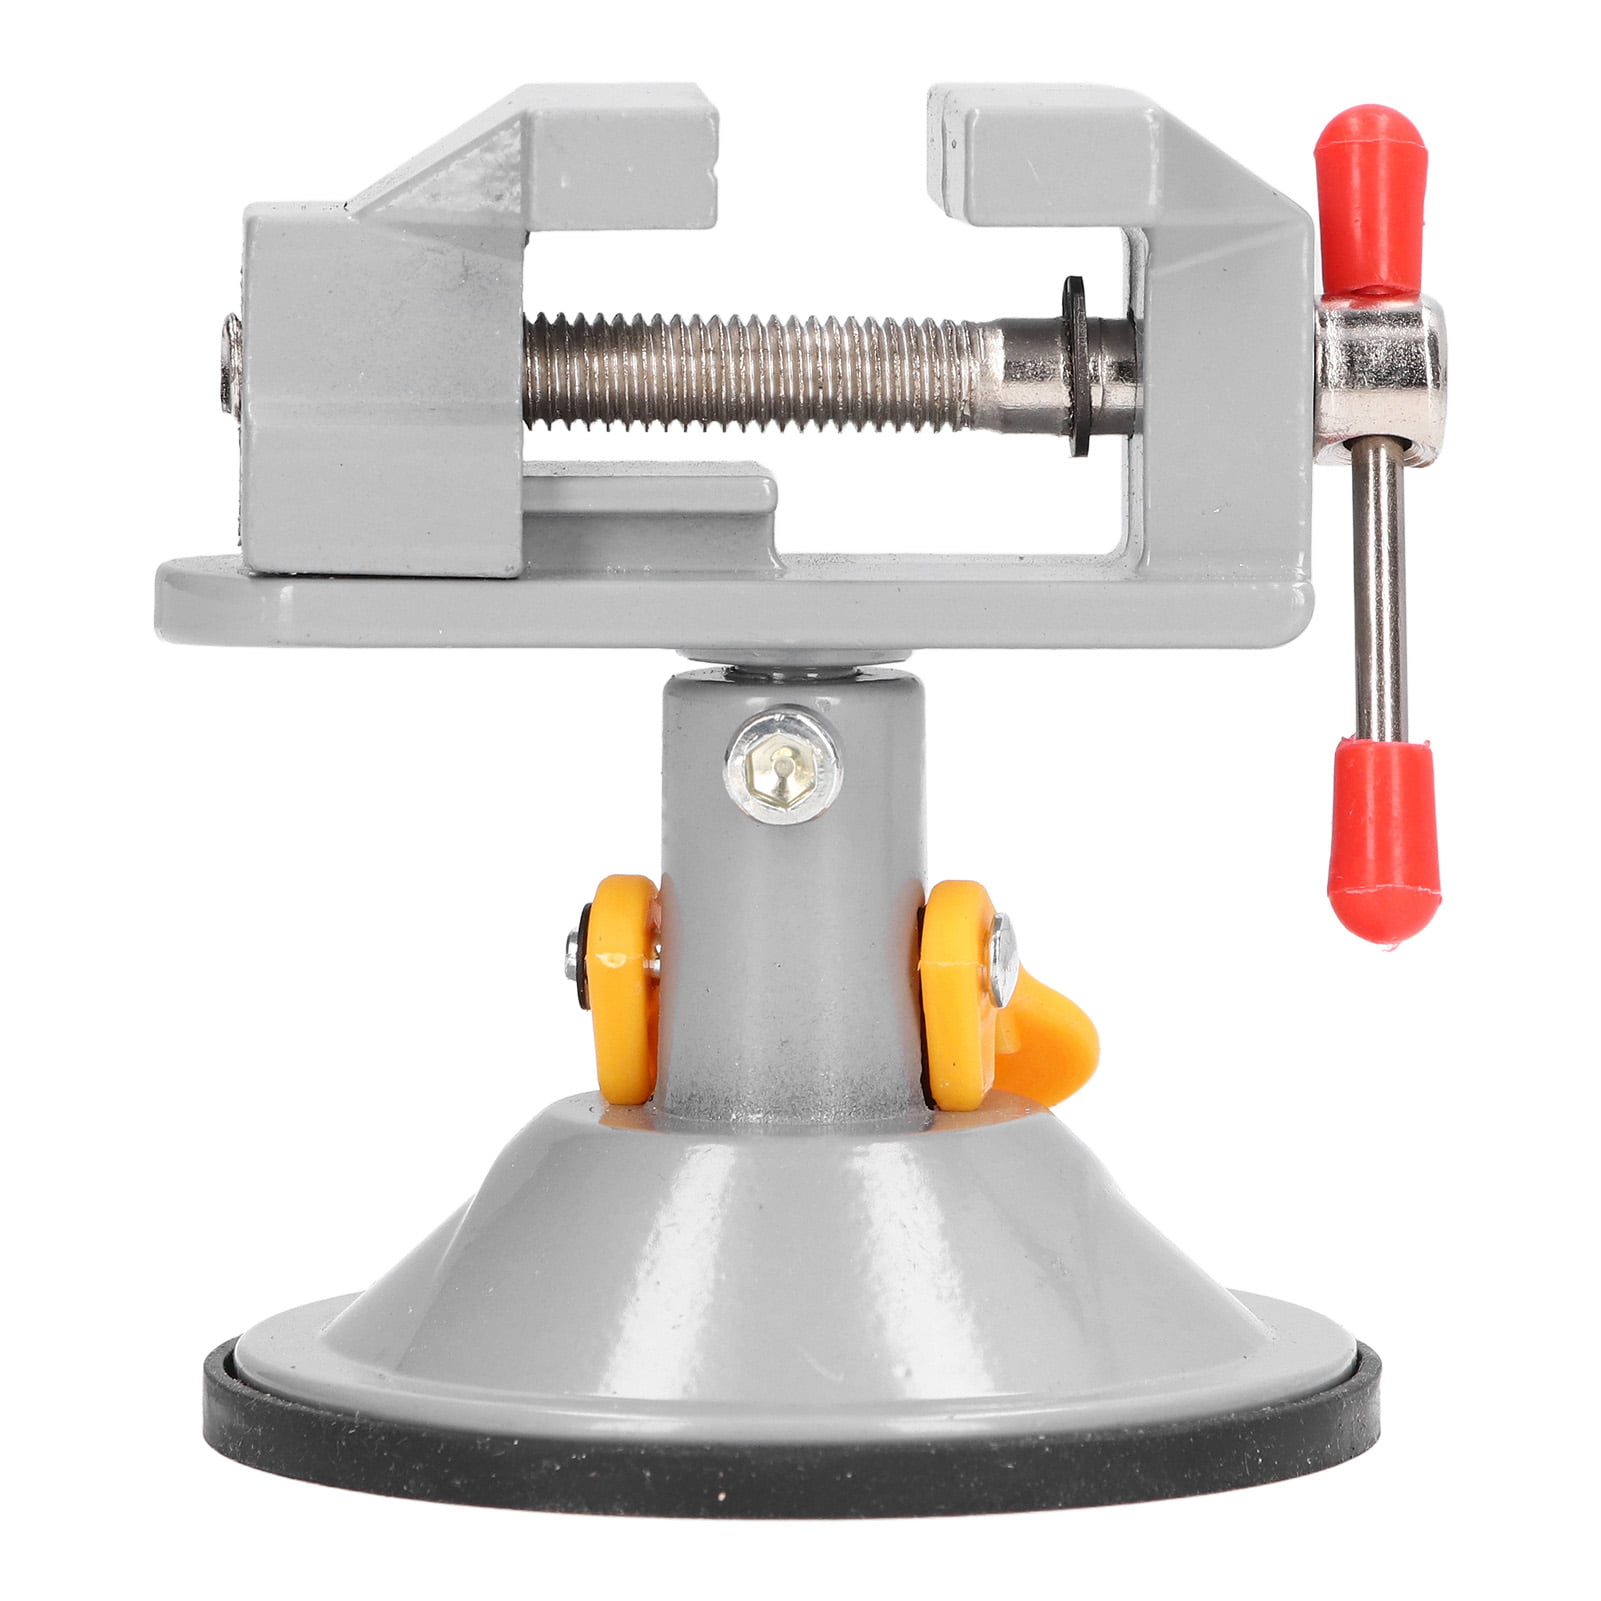 Mini Table Top Bench Vice Vise Press Clamp Rubber Suction Base Carving Fixture 